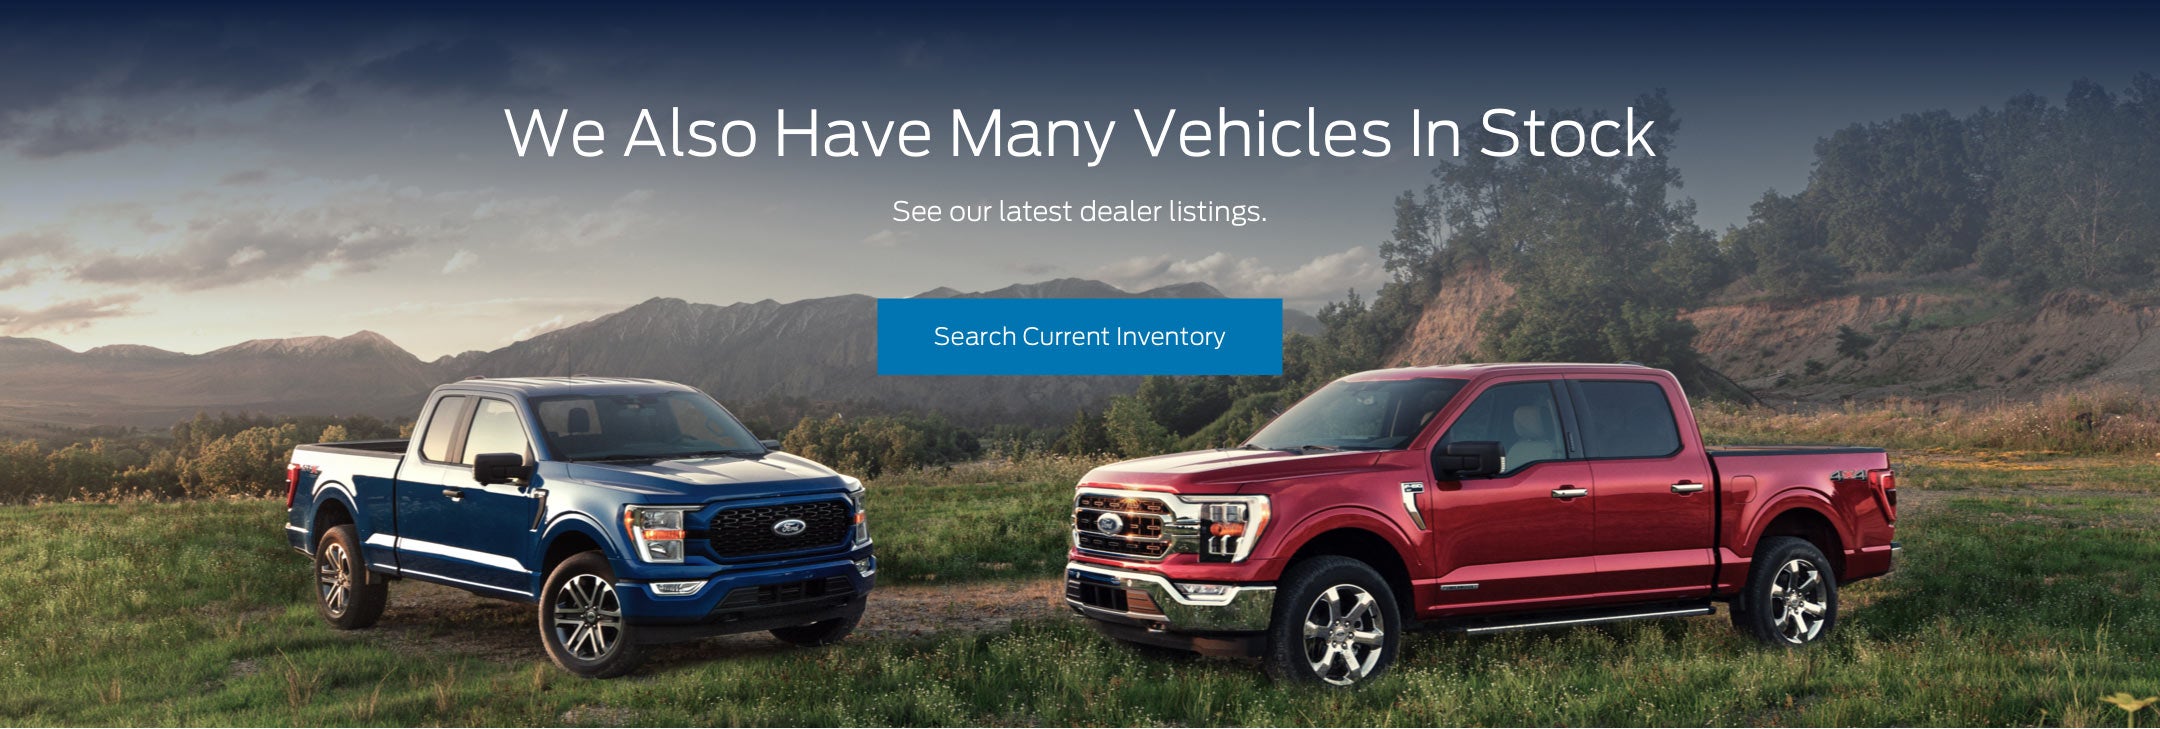 Ford vehicles in stock | Mastel Ford in Olean NY